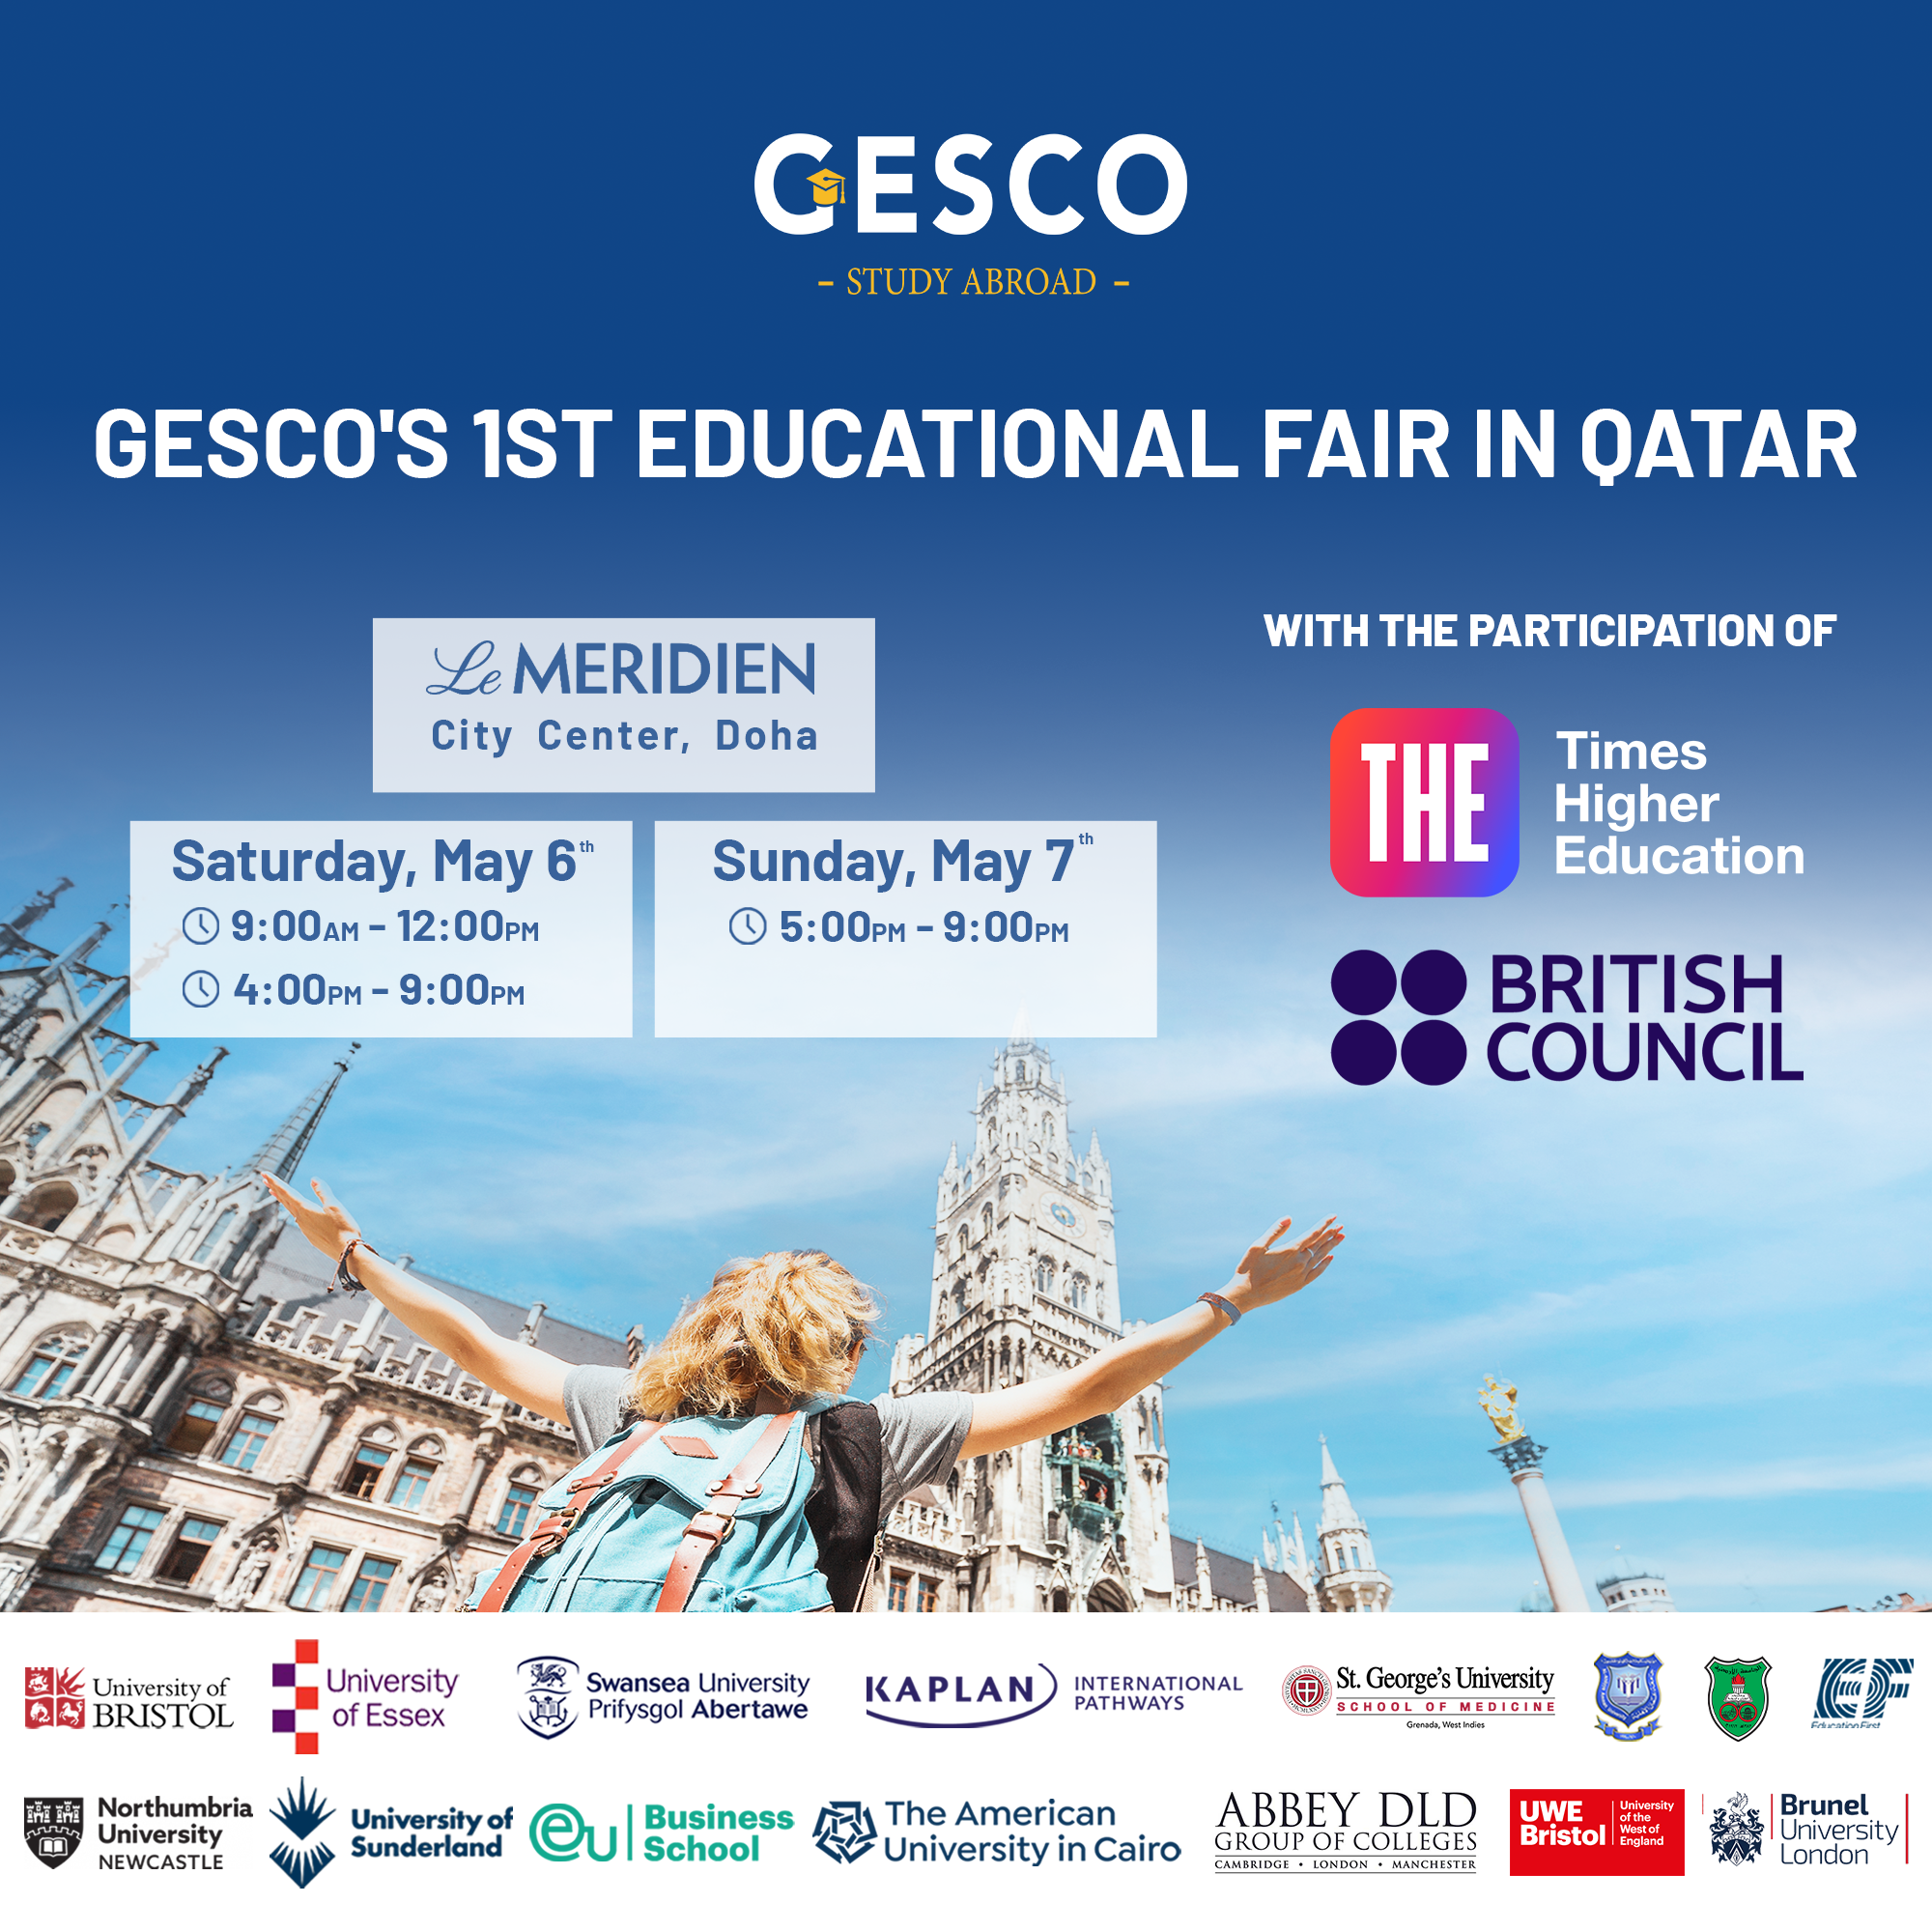 <p style="text-align: justify;">GESCO’s 1st Educational Fair in Qatar – May 6th & 7th 2023</p>